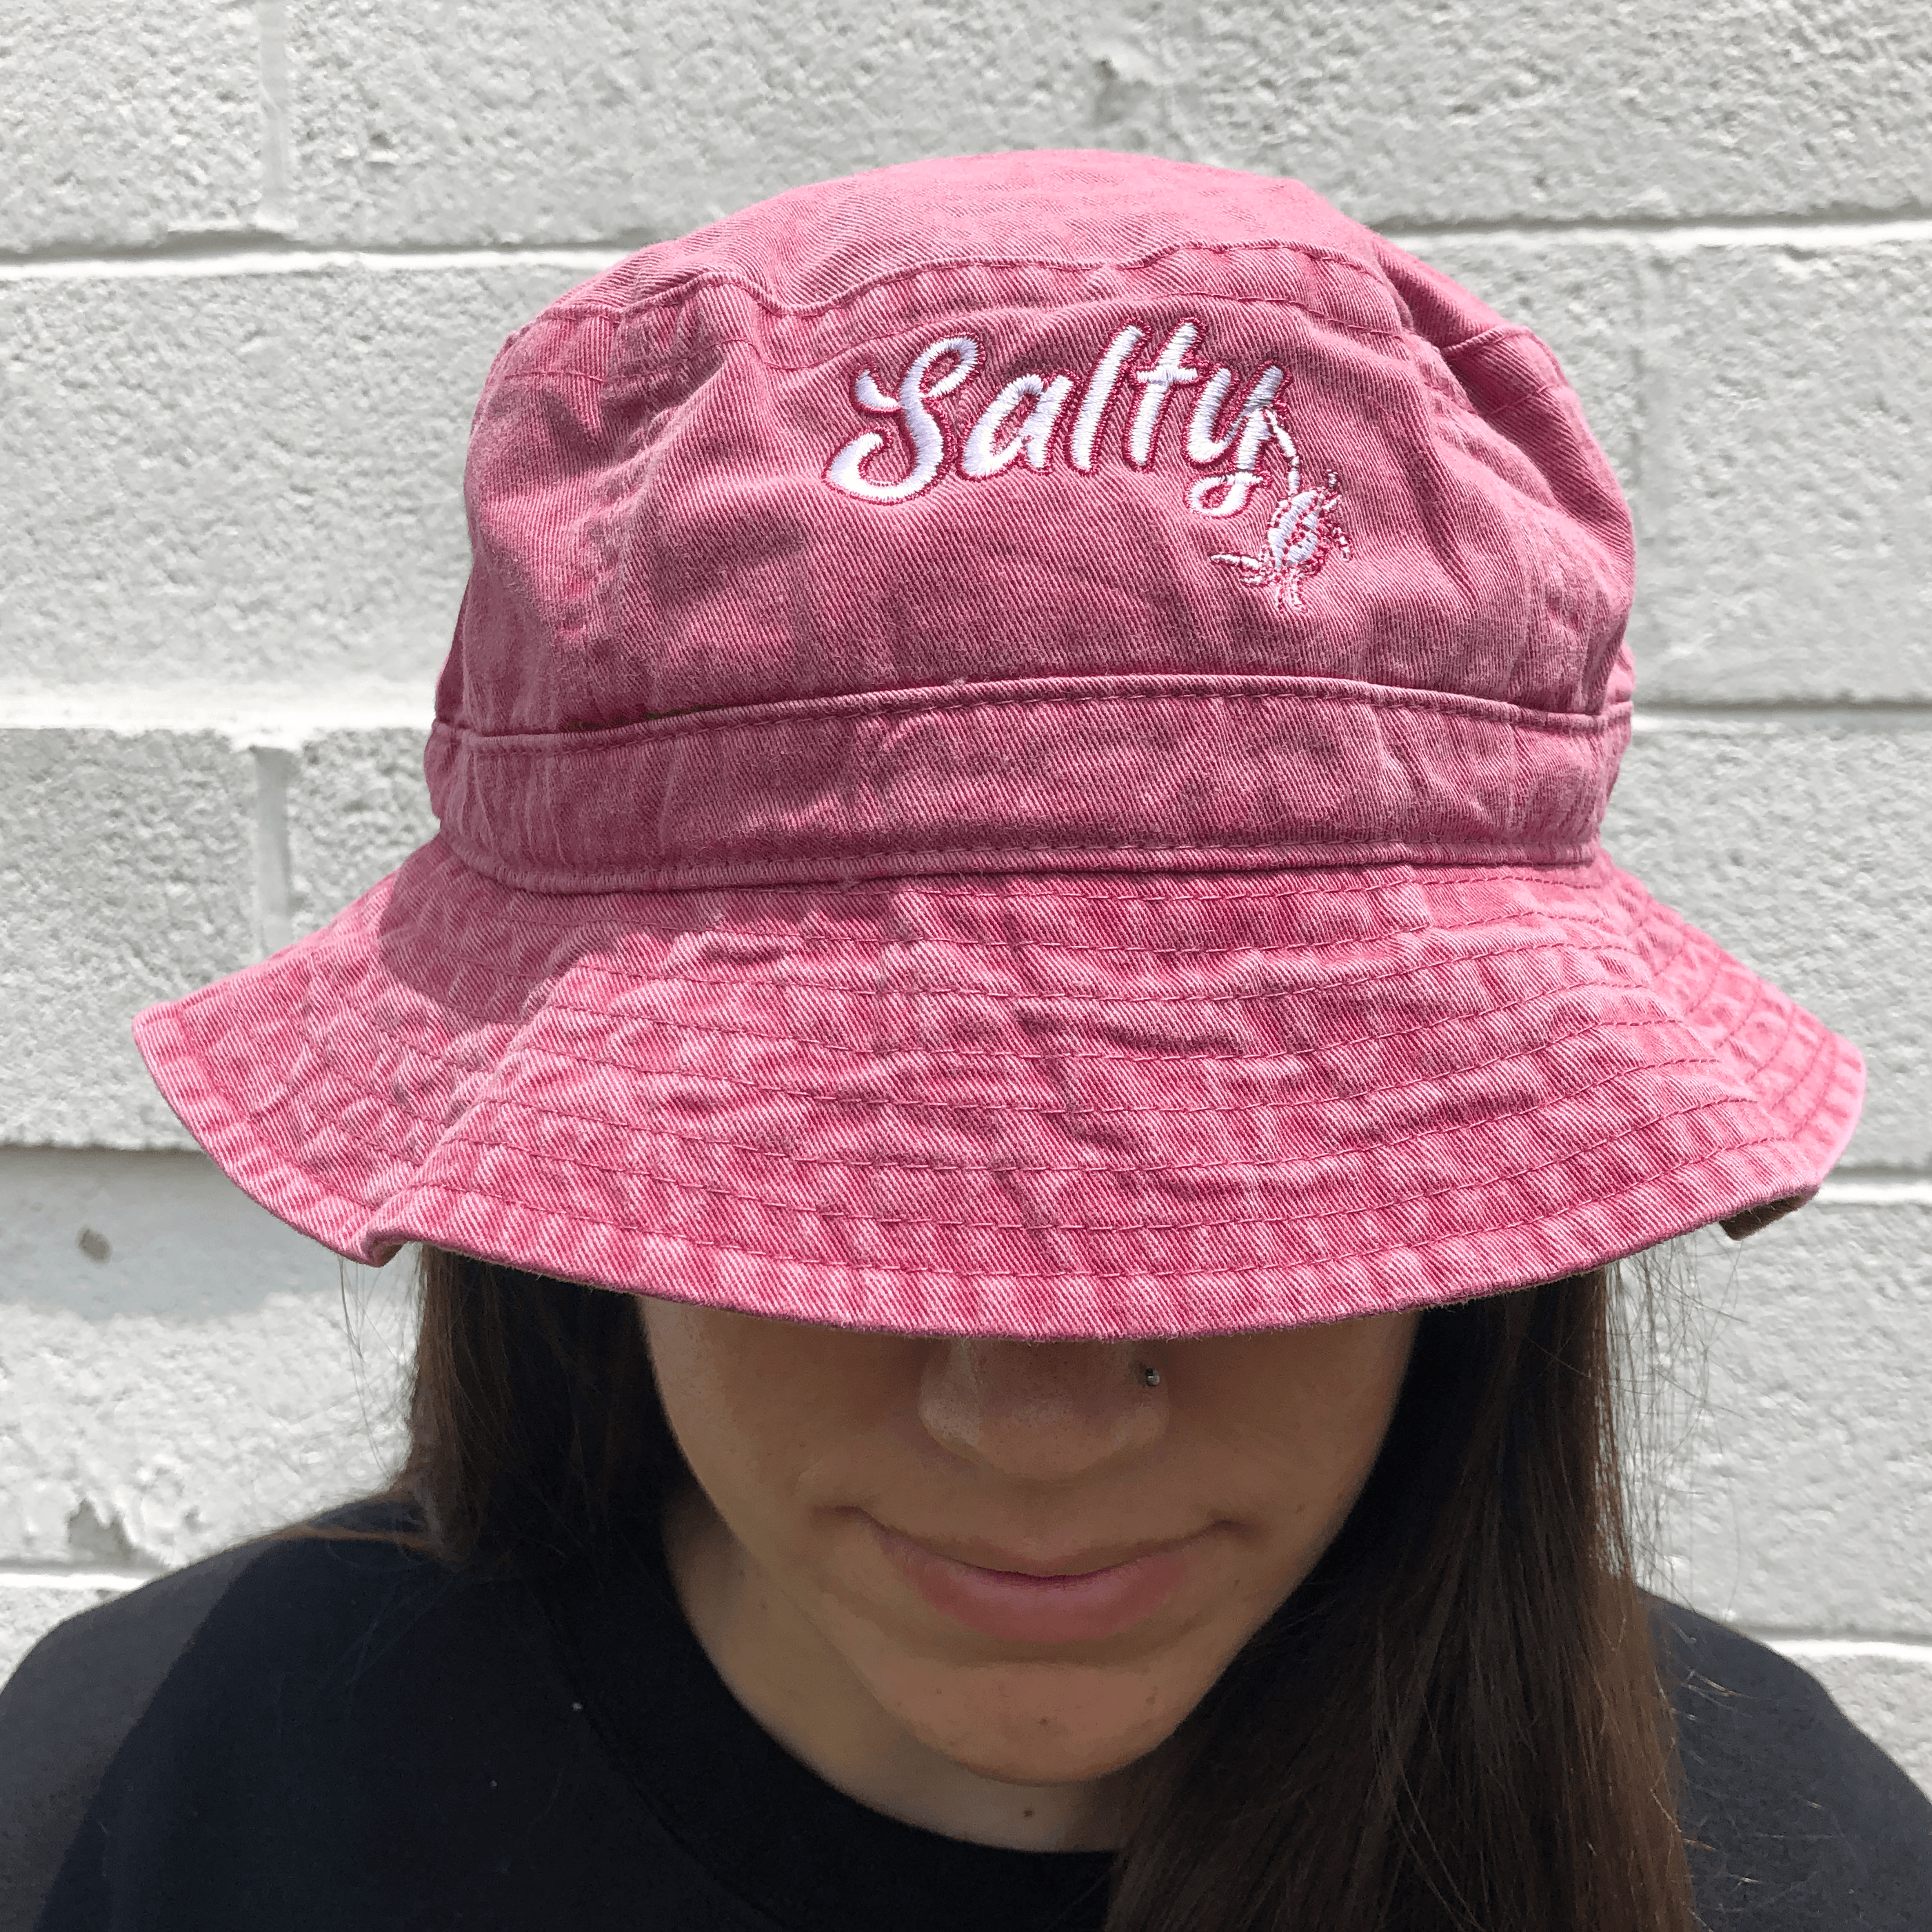 Salty (Red) / Bucket Hat - Route One Apparel